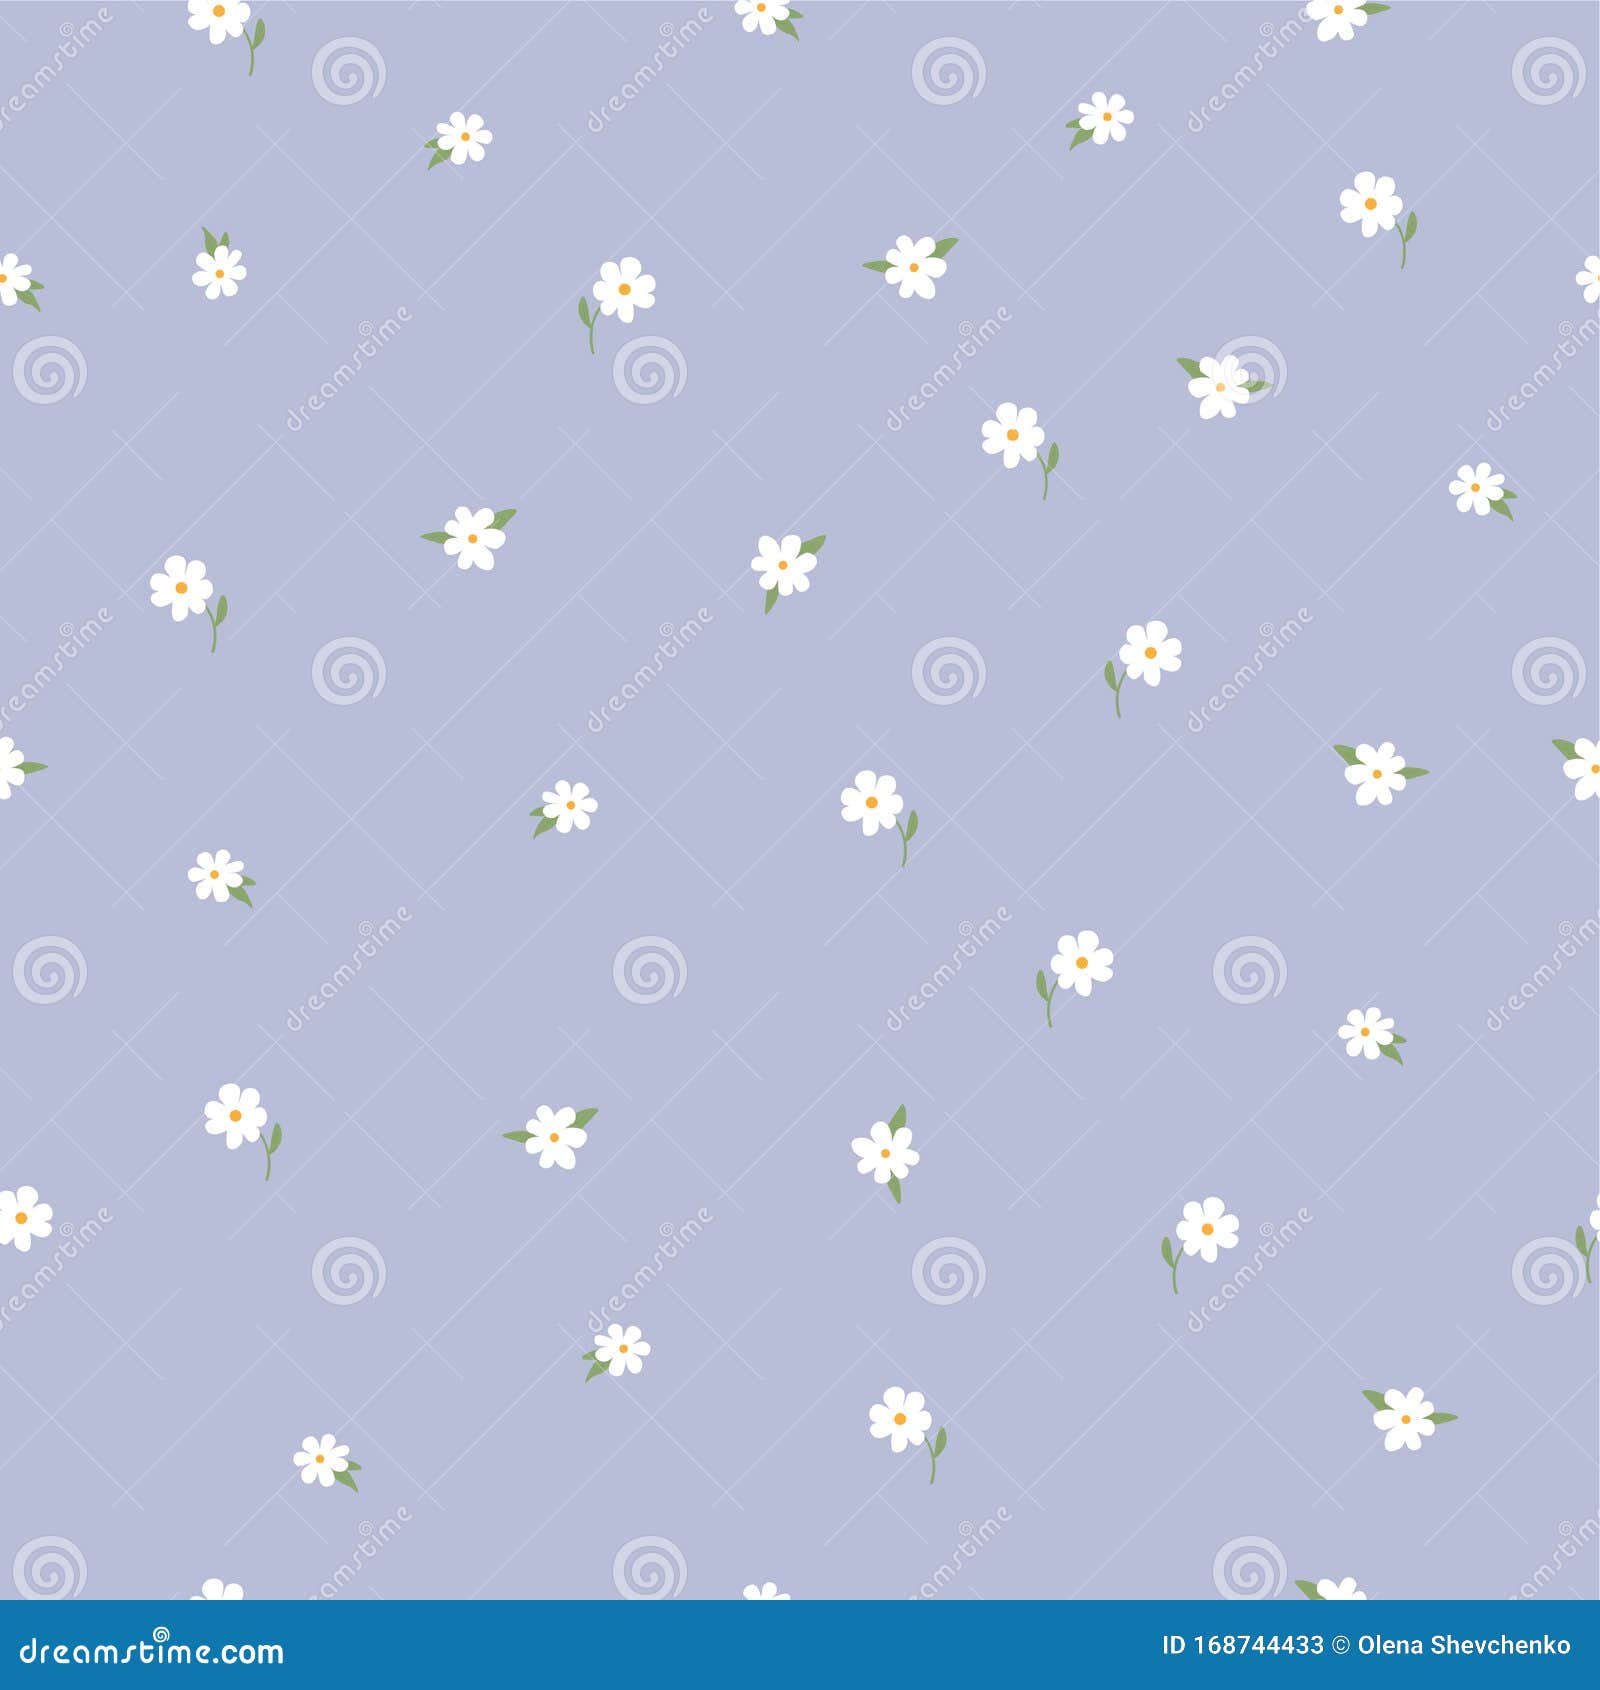 Pastel, Cute Simple Pattern with Flowers Stock Illustration ...